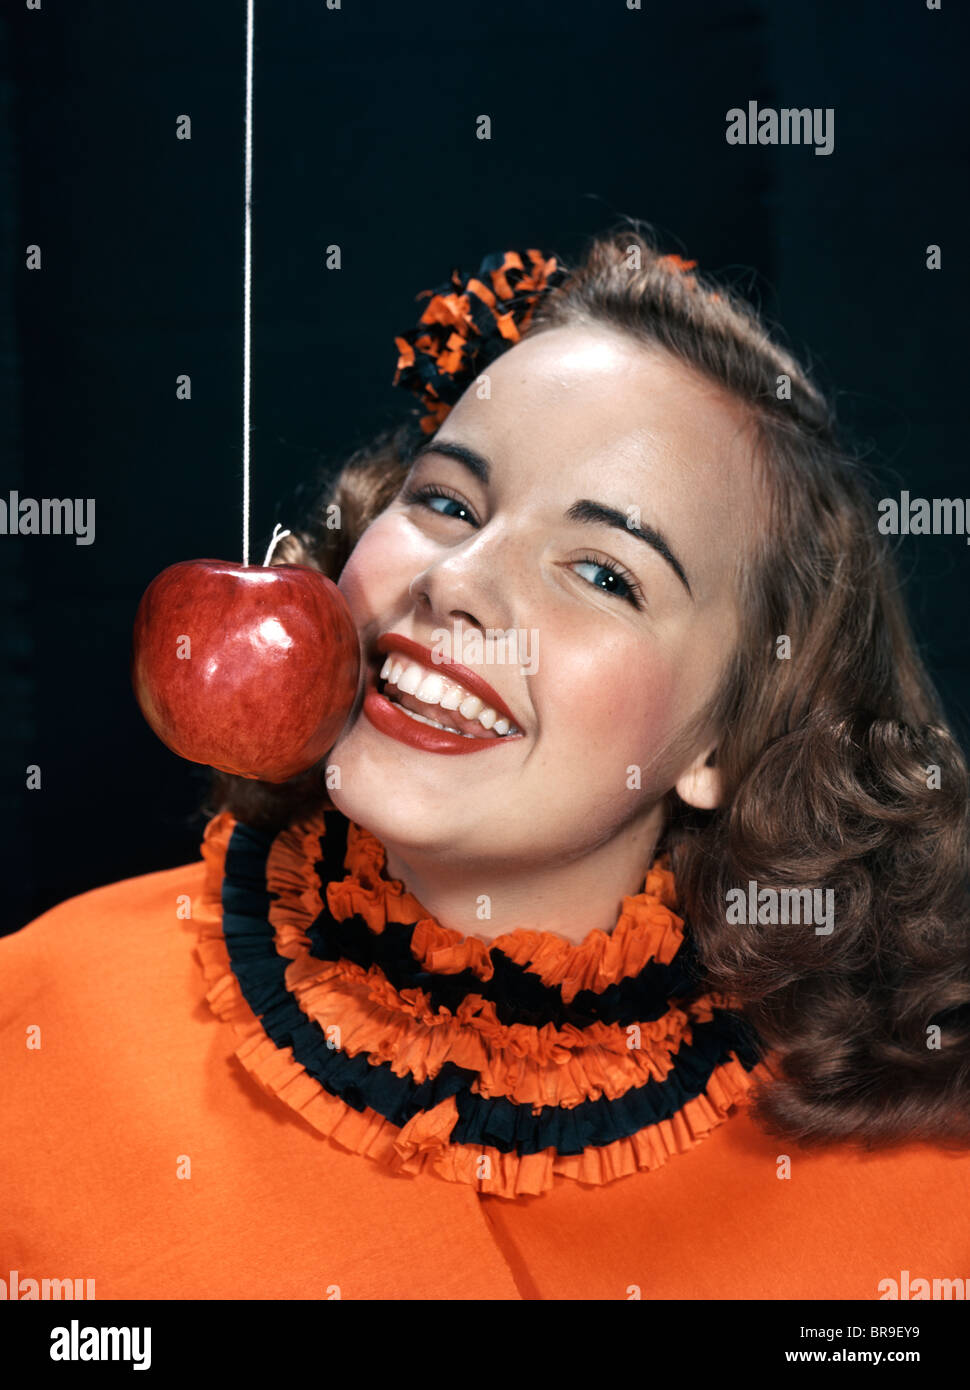 1940s 1950s SMILING YOUNG WOMAN WEARING HALLOWEEN COSTUME BOBBING FOR APPLE ON A STRING Stock Photo